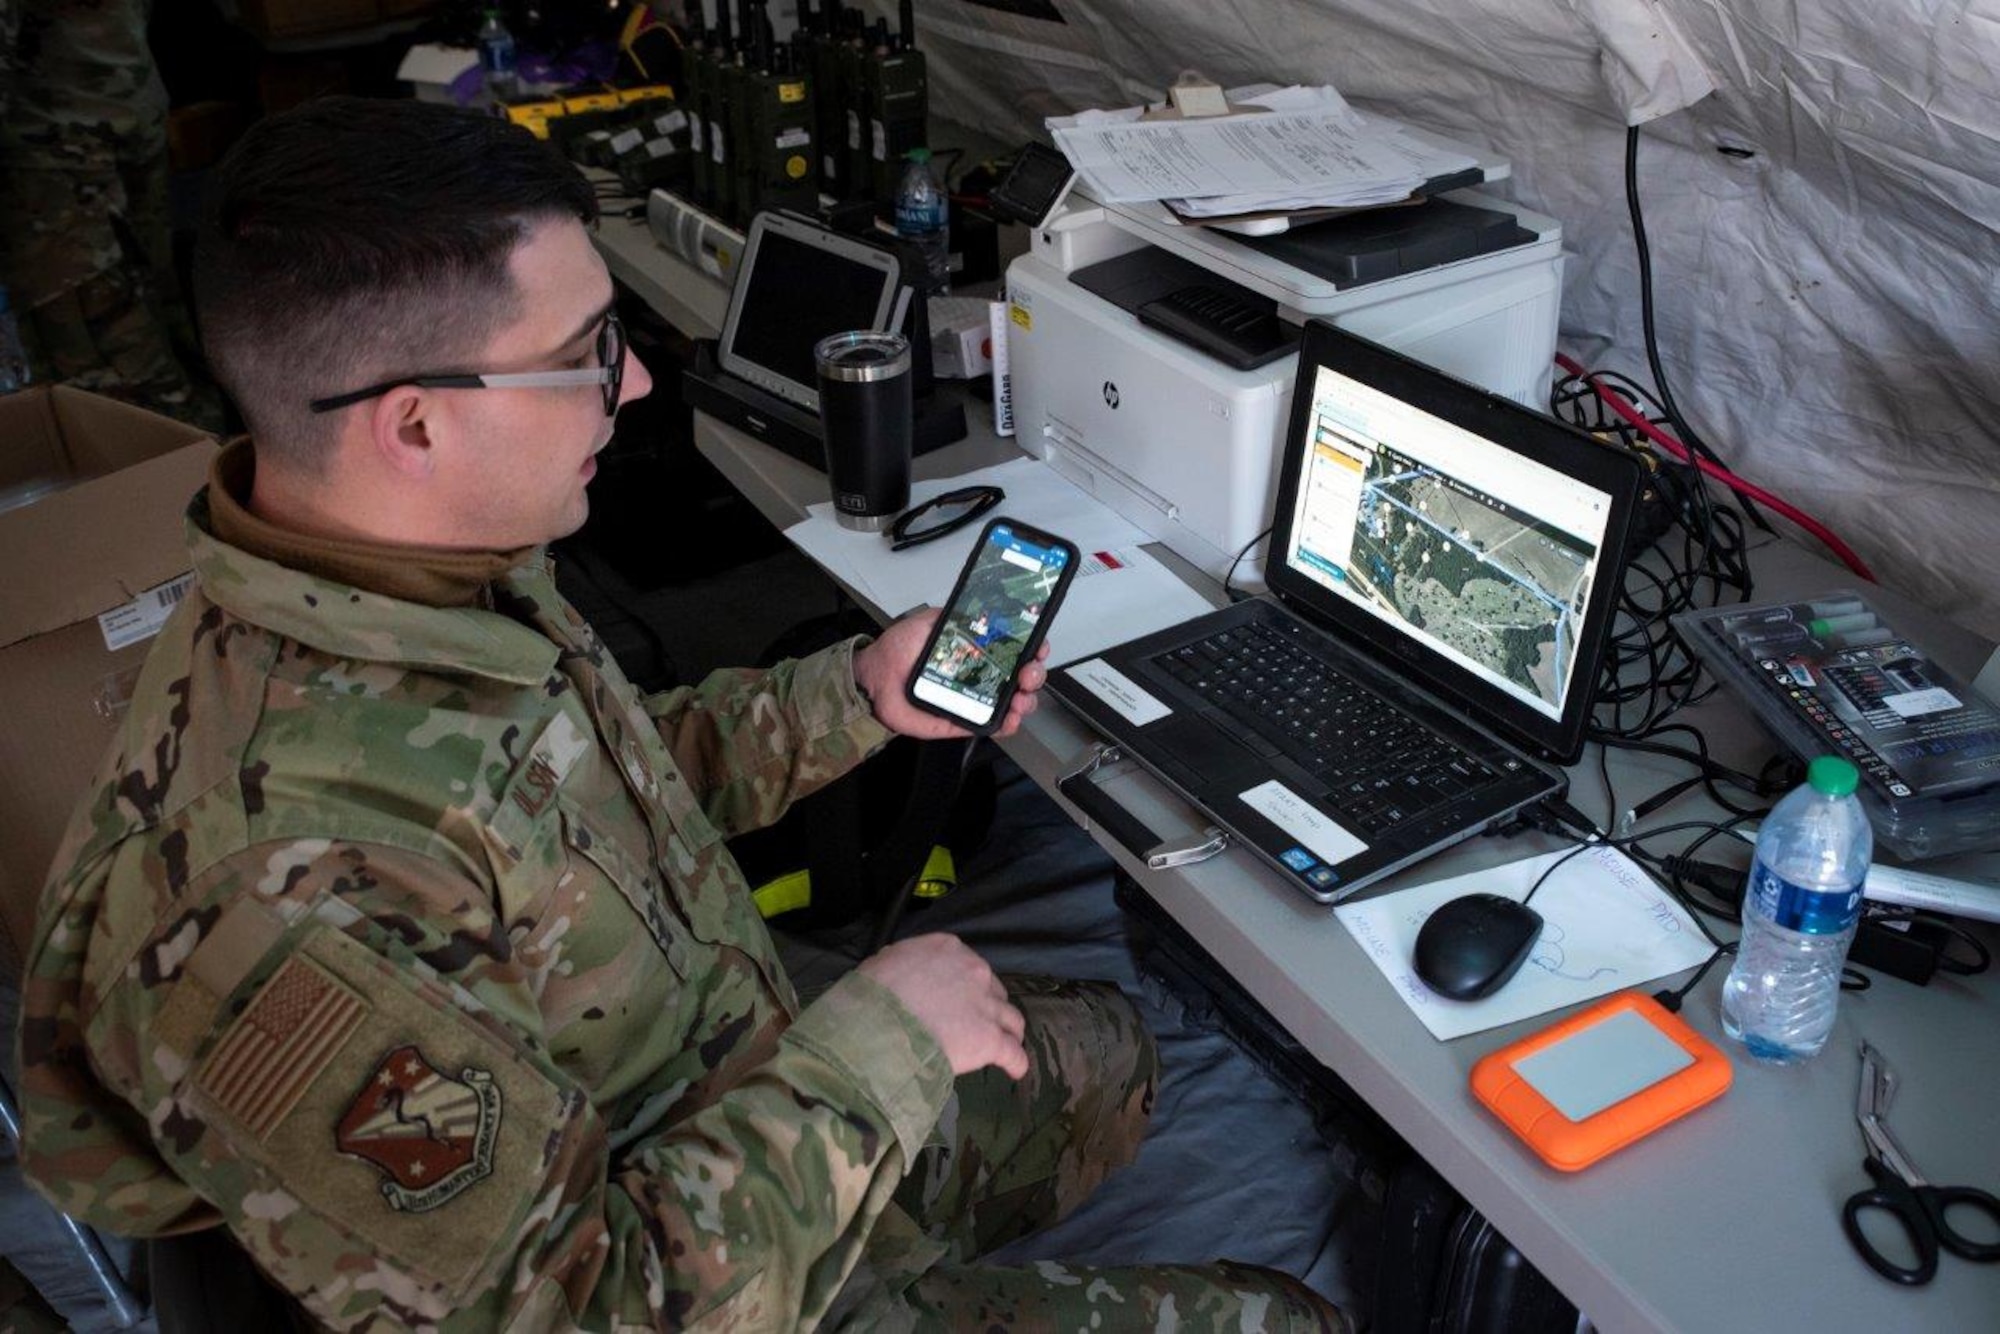 Master Sgt. Mark Olsen, NCOIC for the survey team, overlays radiation measurements for hazard area monitoring during a field exercise in March 2022 at the Warfighter Training Facility at Wright-Patterson Air Force Base. This exercise is part of the Air Force Radiation Assessment Team basic course at the USAF School of Aerospace Medicine. (U.S. Air Force photo / Richard Eldridge)